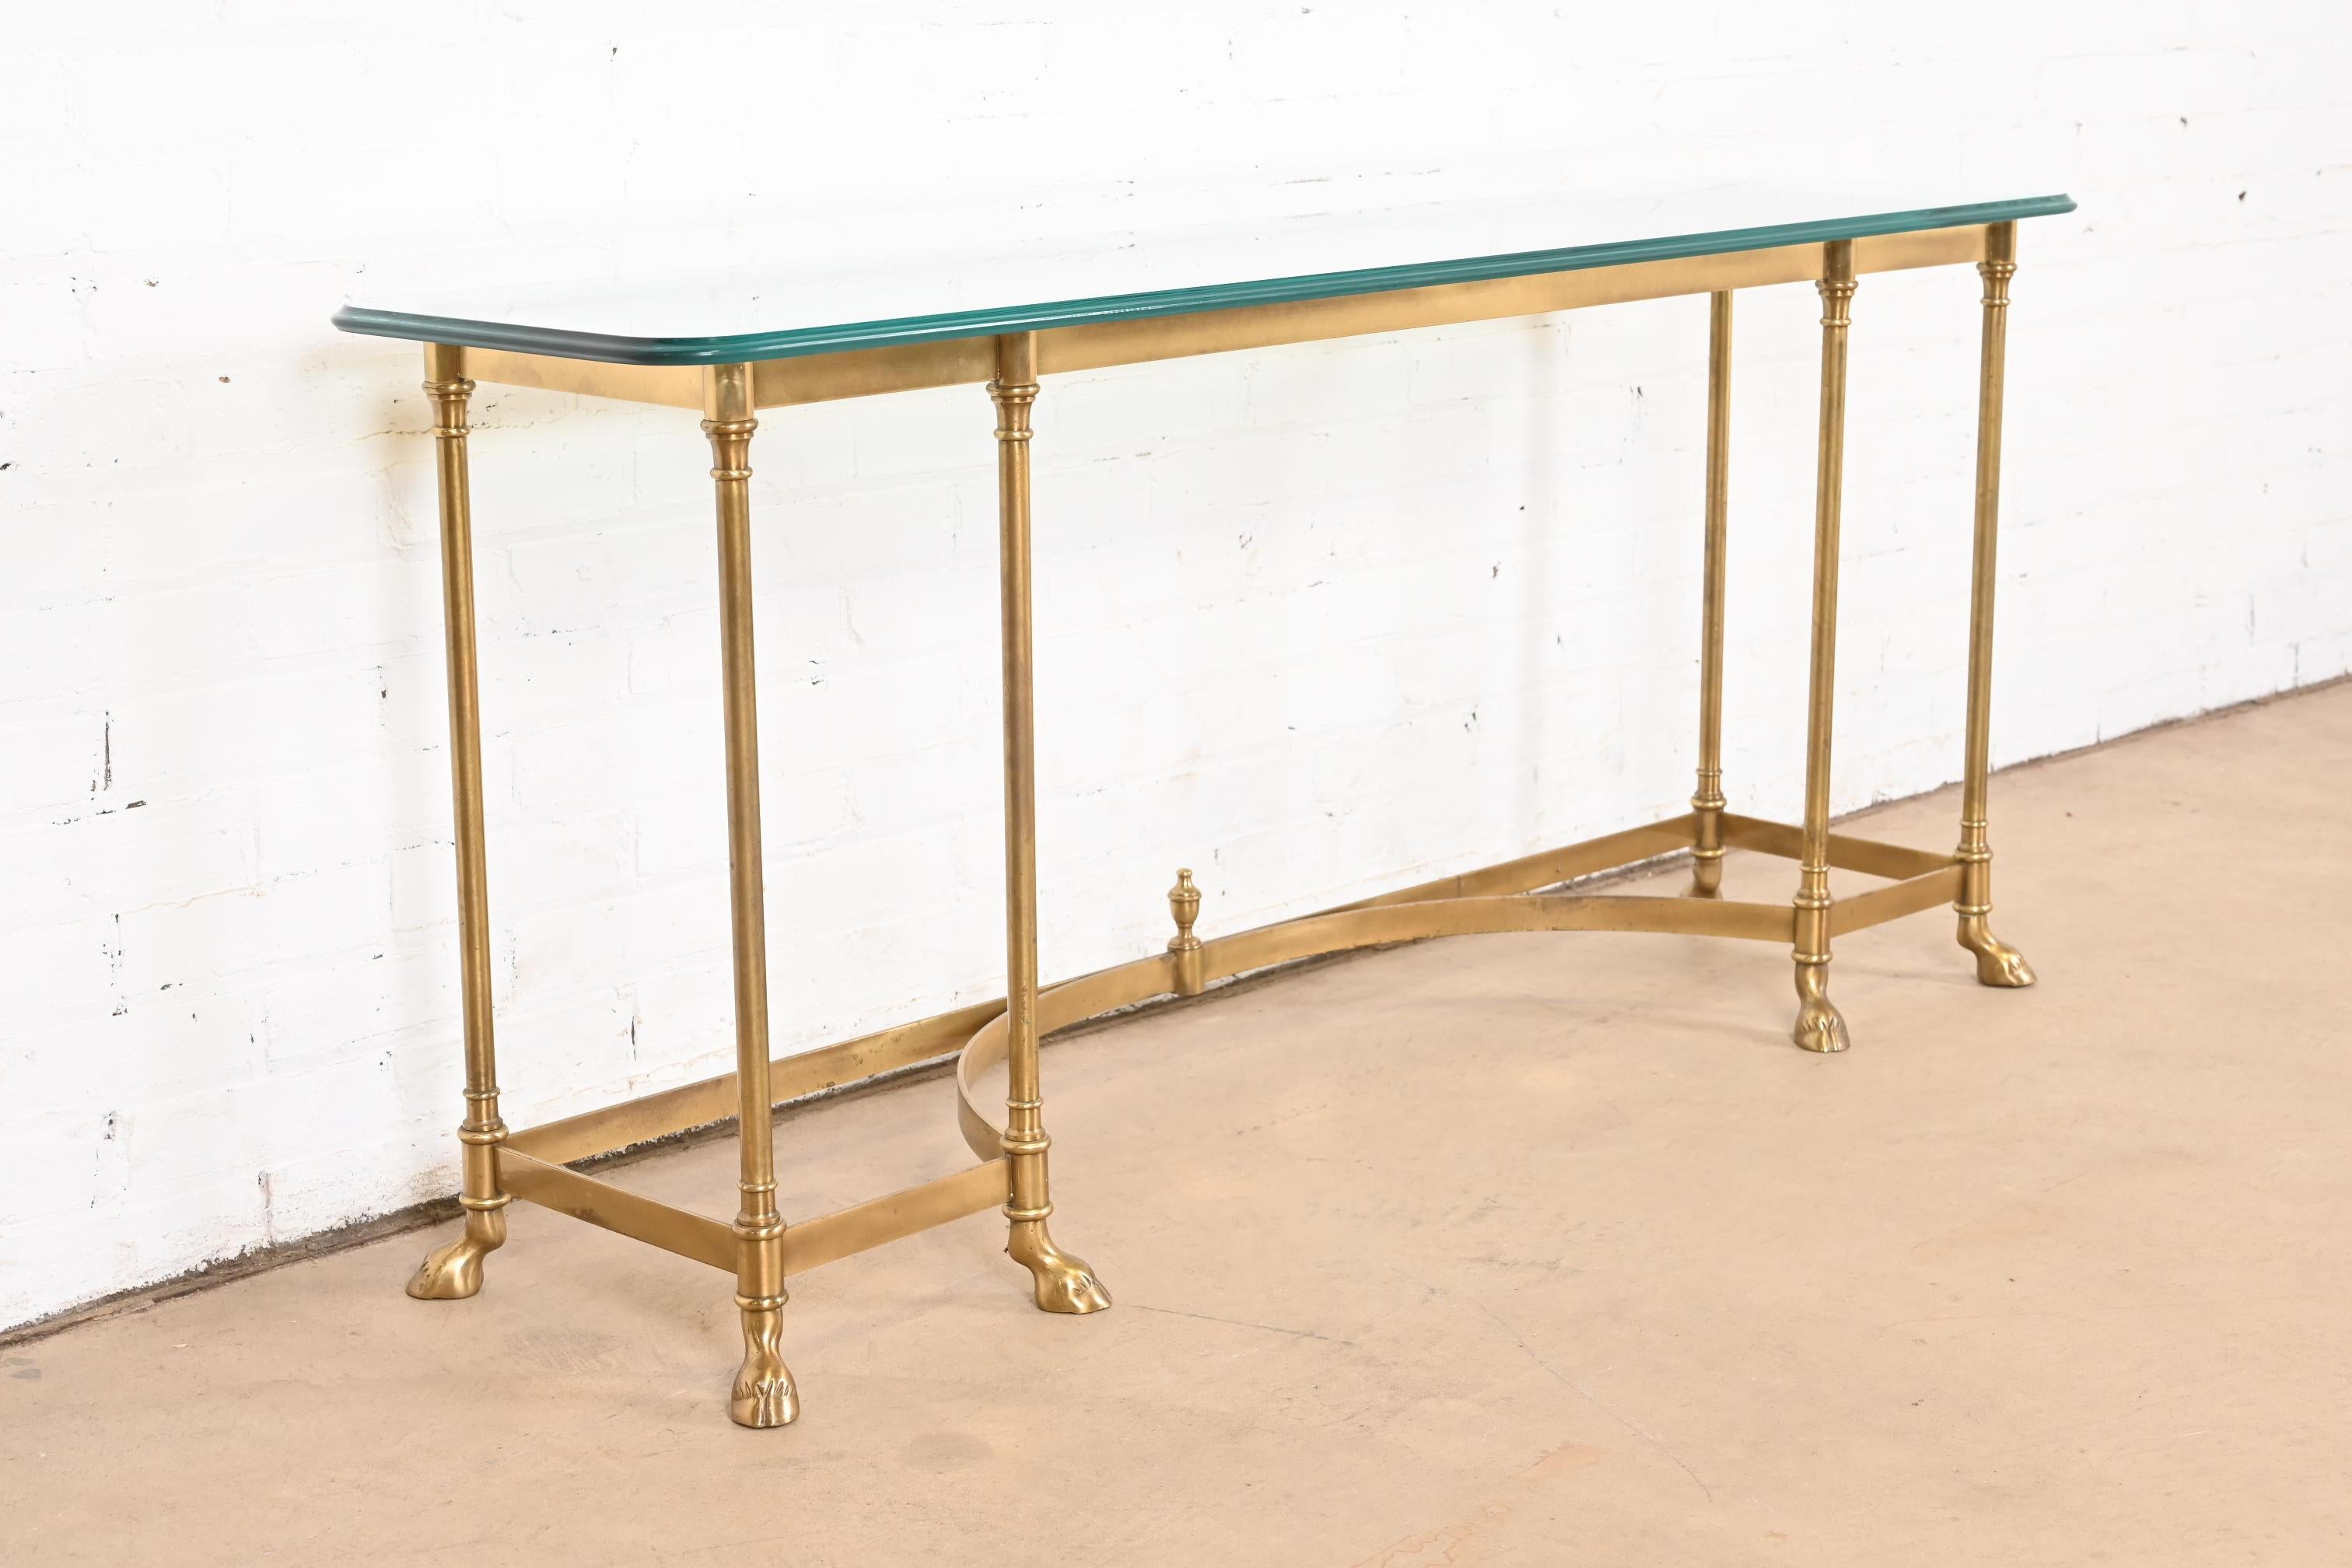 Labarge Hollywood Regency Brass and Glass Hooved Feet Console Table, Circa 1960s For Sale 1